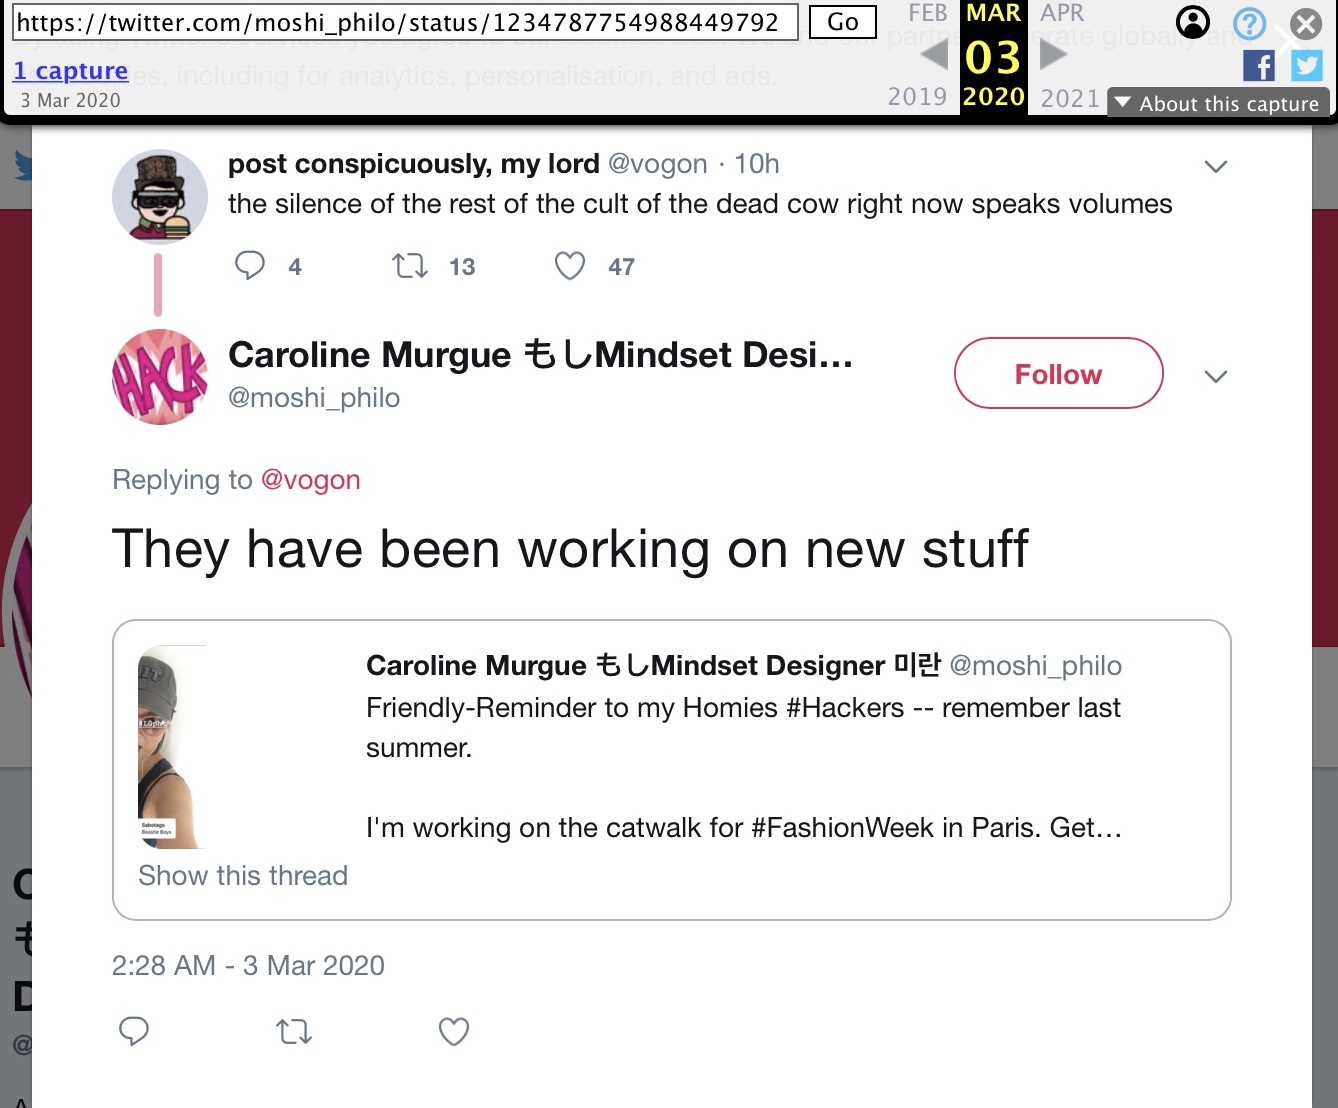 3 Mar 2020 tweet from @moshi_philo: They have been working on new stuff [in response to a 2 Mar 2020 tweet from @vogon: the silence of the rest of the cult of the dead cow right now speaks volumes]